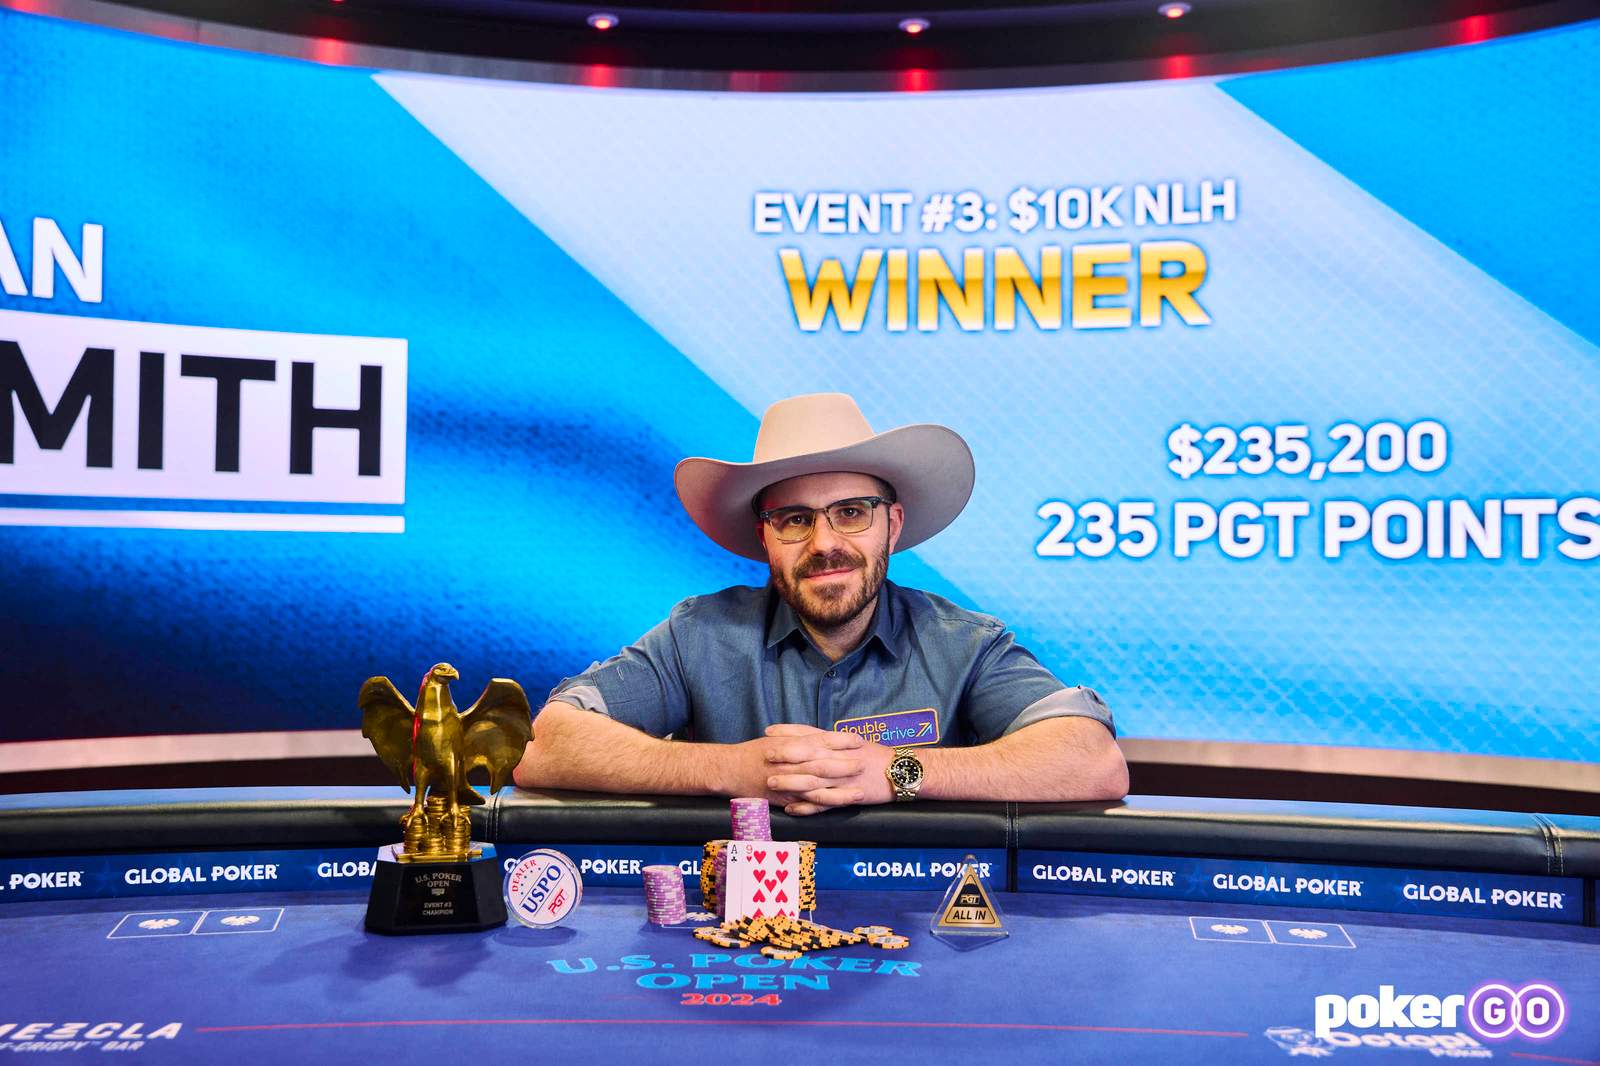 Dan Smith Emerges Victorious in Event #3: $10,100 No-Limit Hold'em